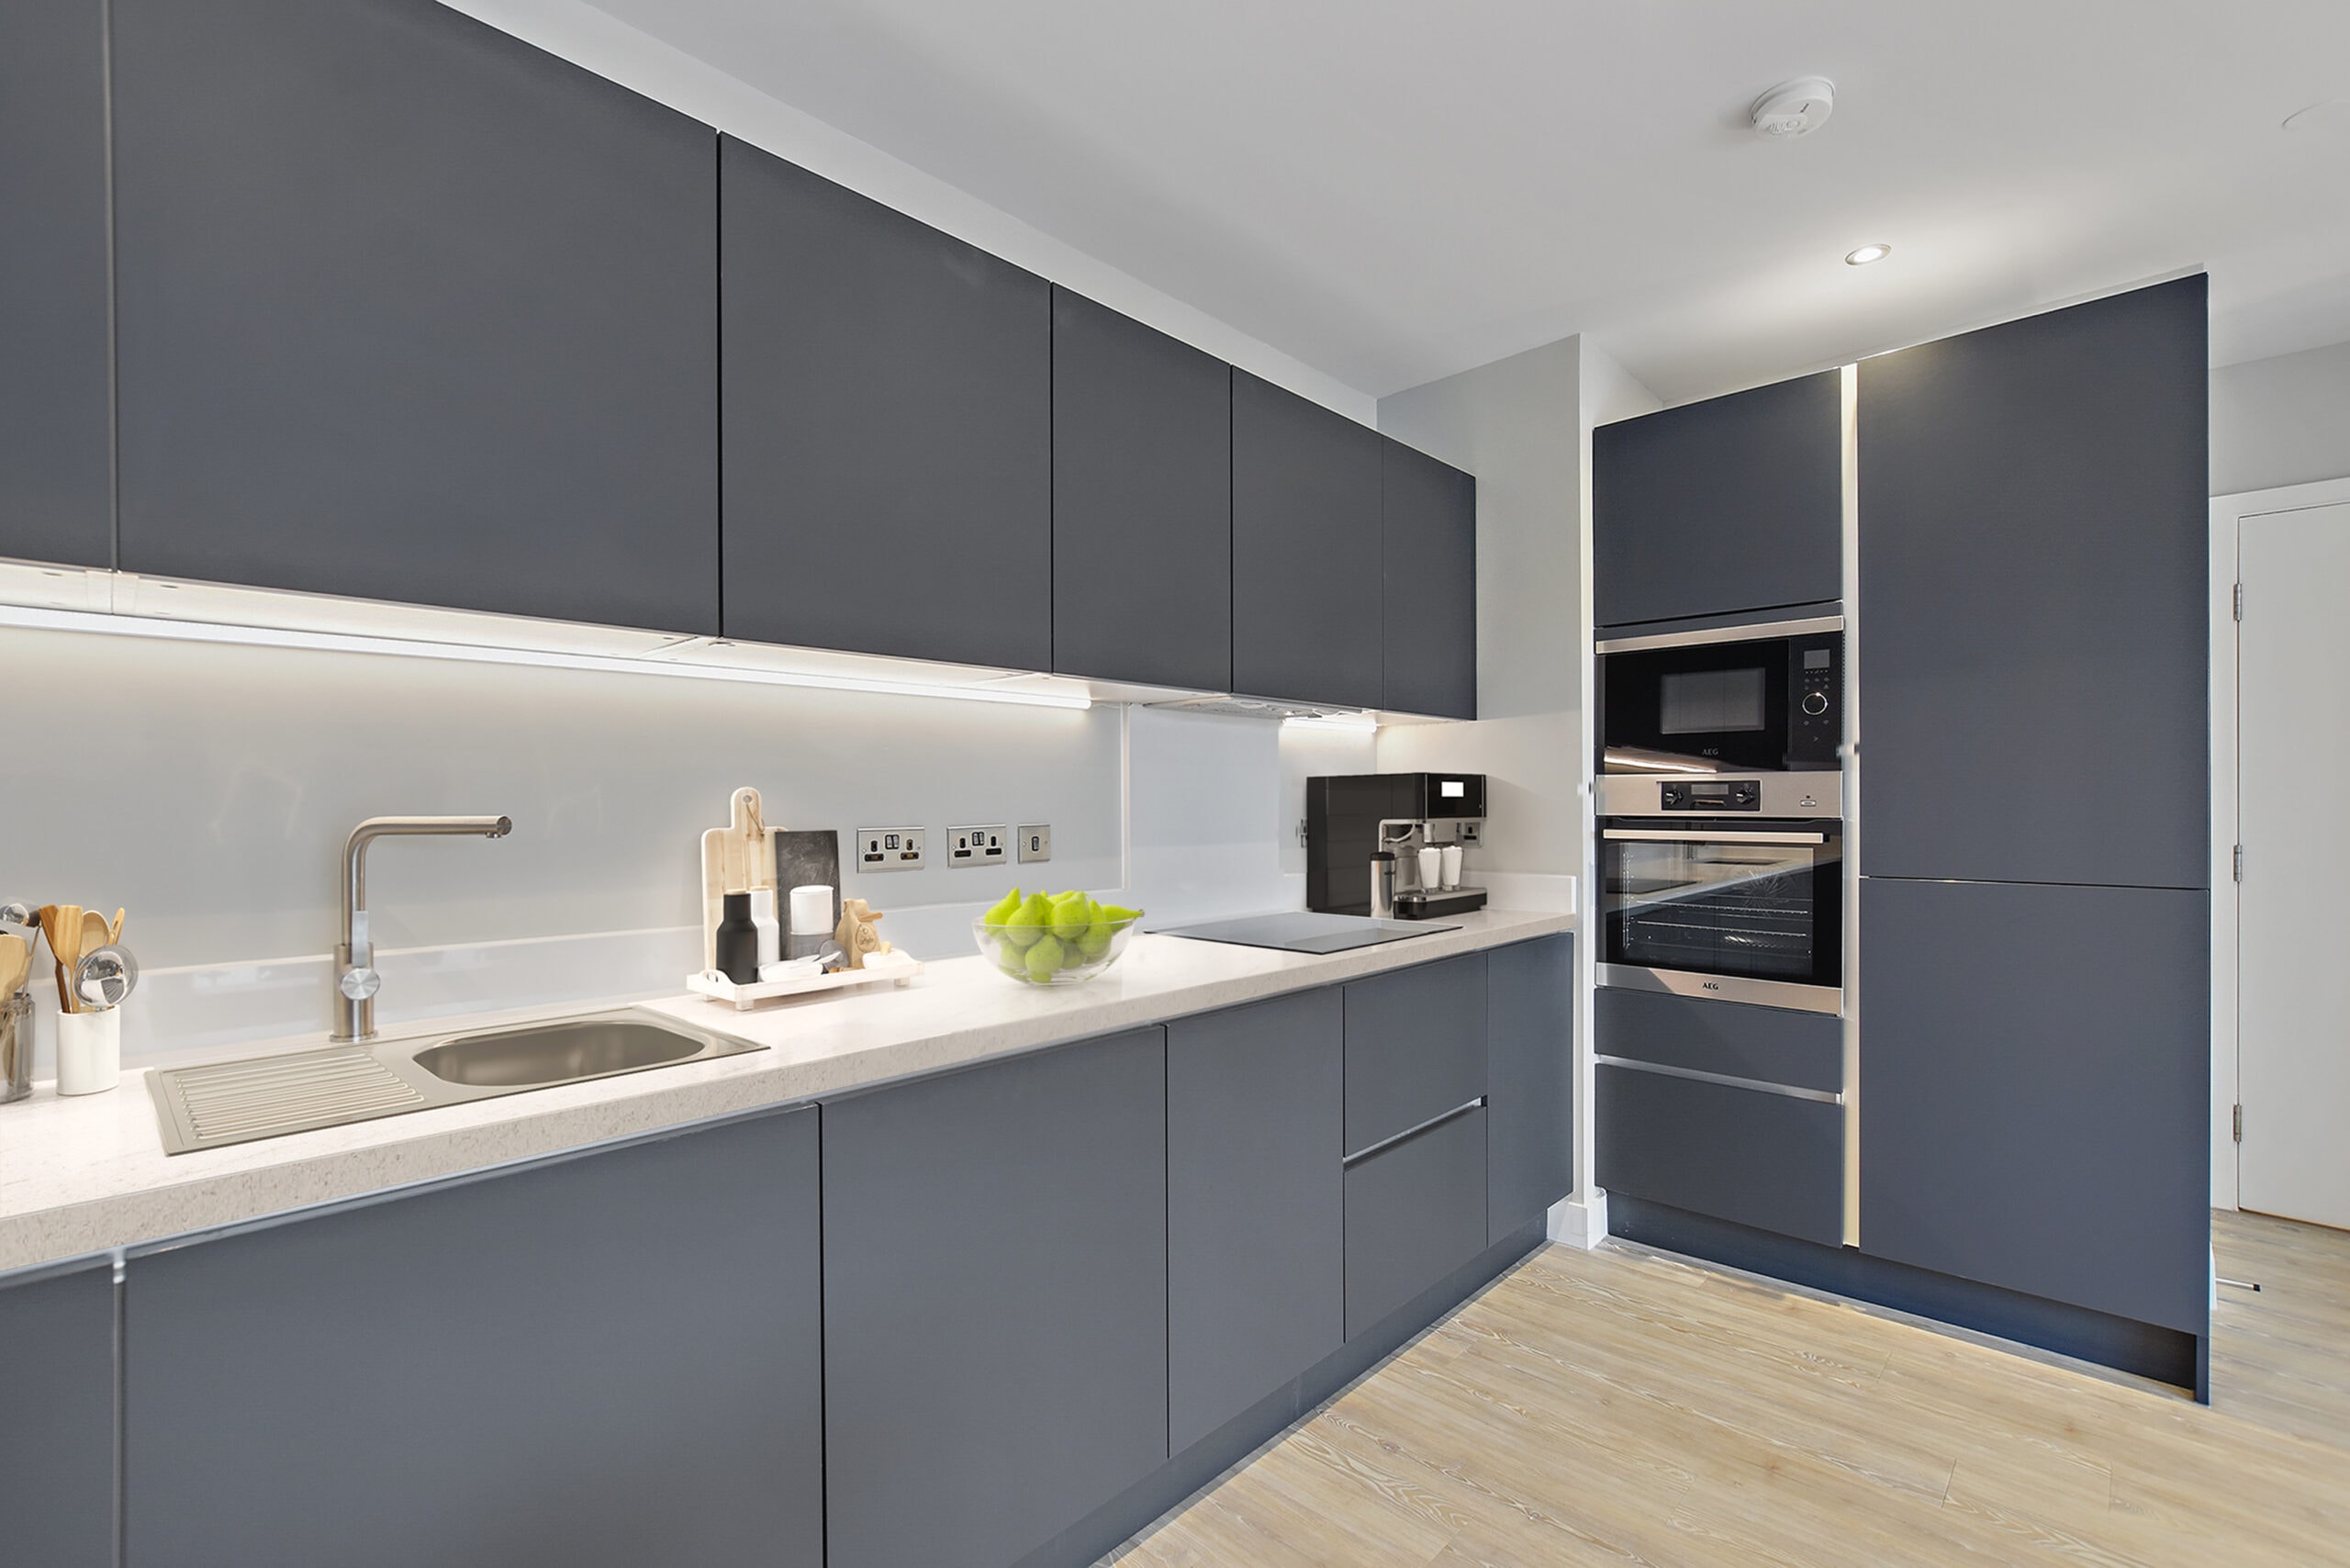 An interior image of a kitchen at the Lampton Parkside development by Notting Hill Genesis - available to buy through Shared Ownership on Share to Buy!